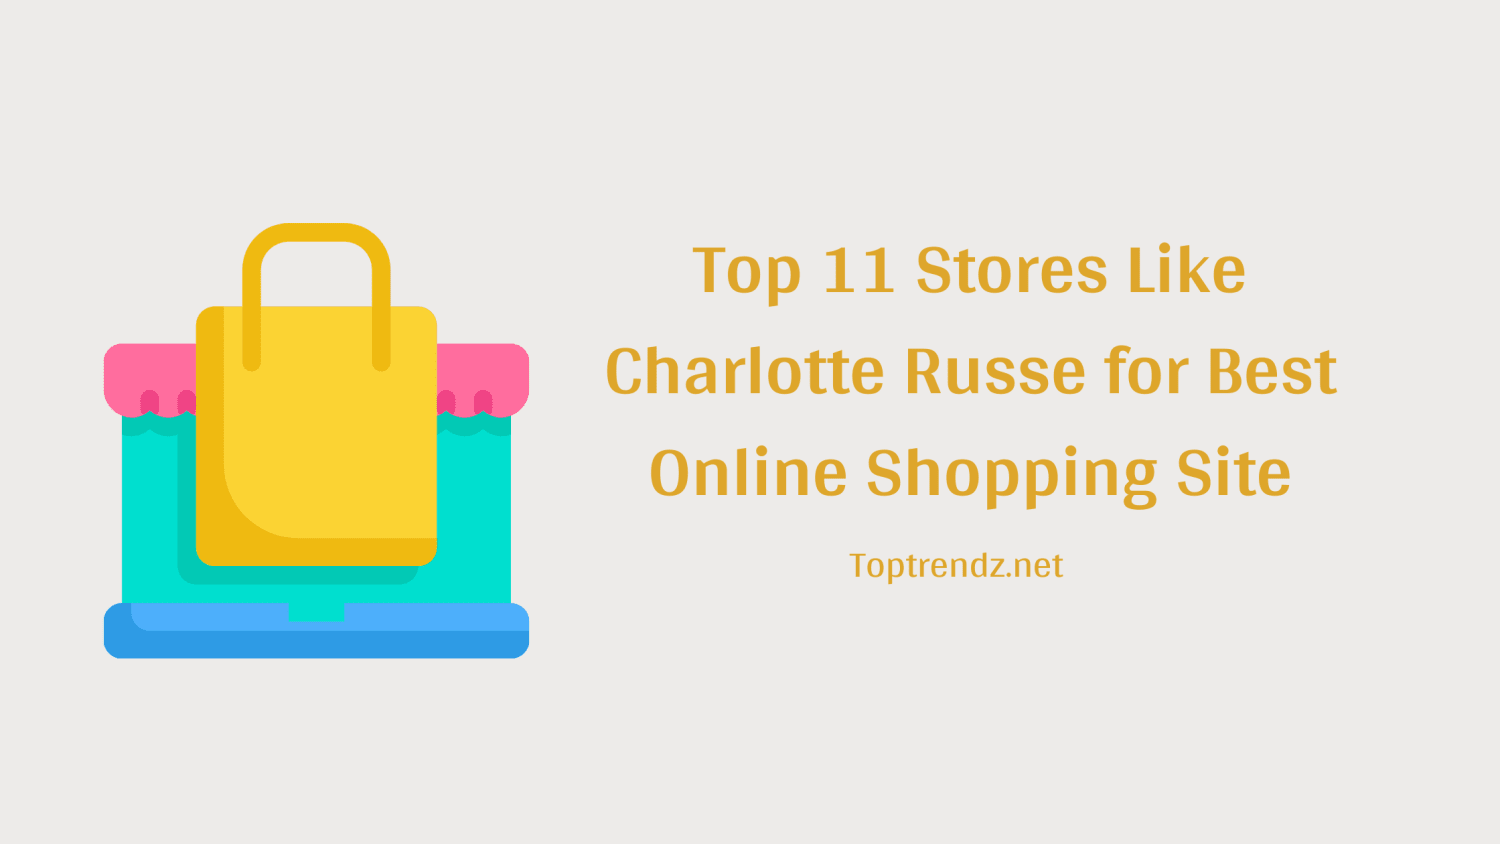 Top 11 Stores Like Charlotte Russe for Best Online Shopping Site